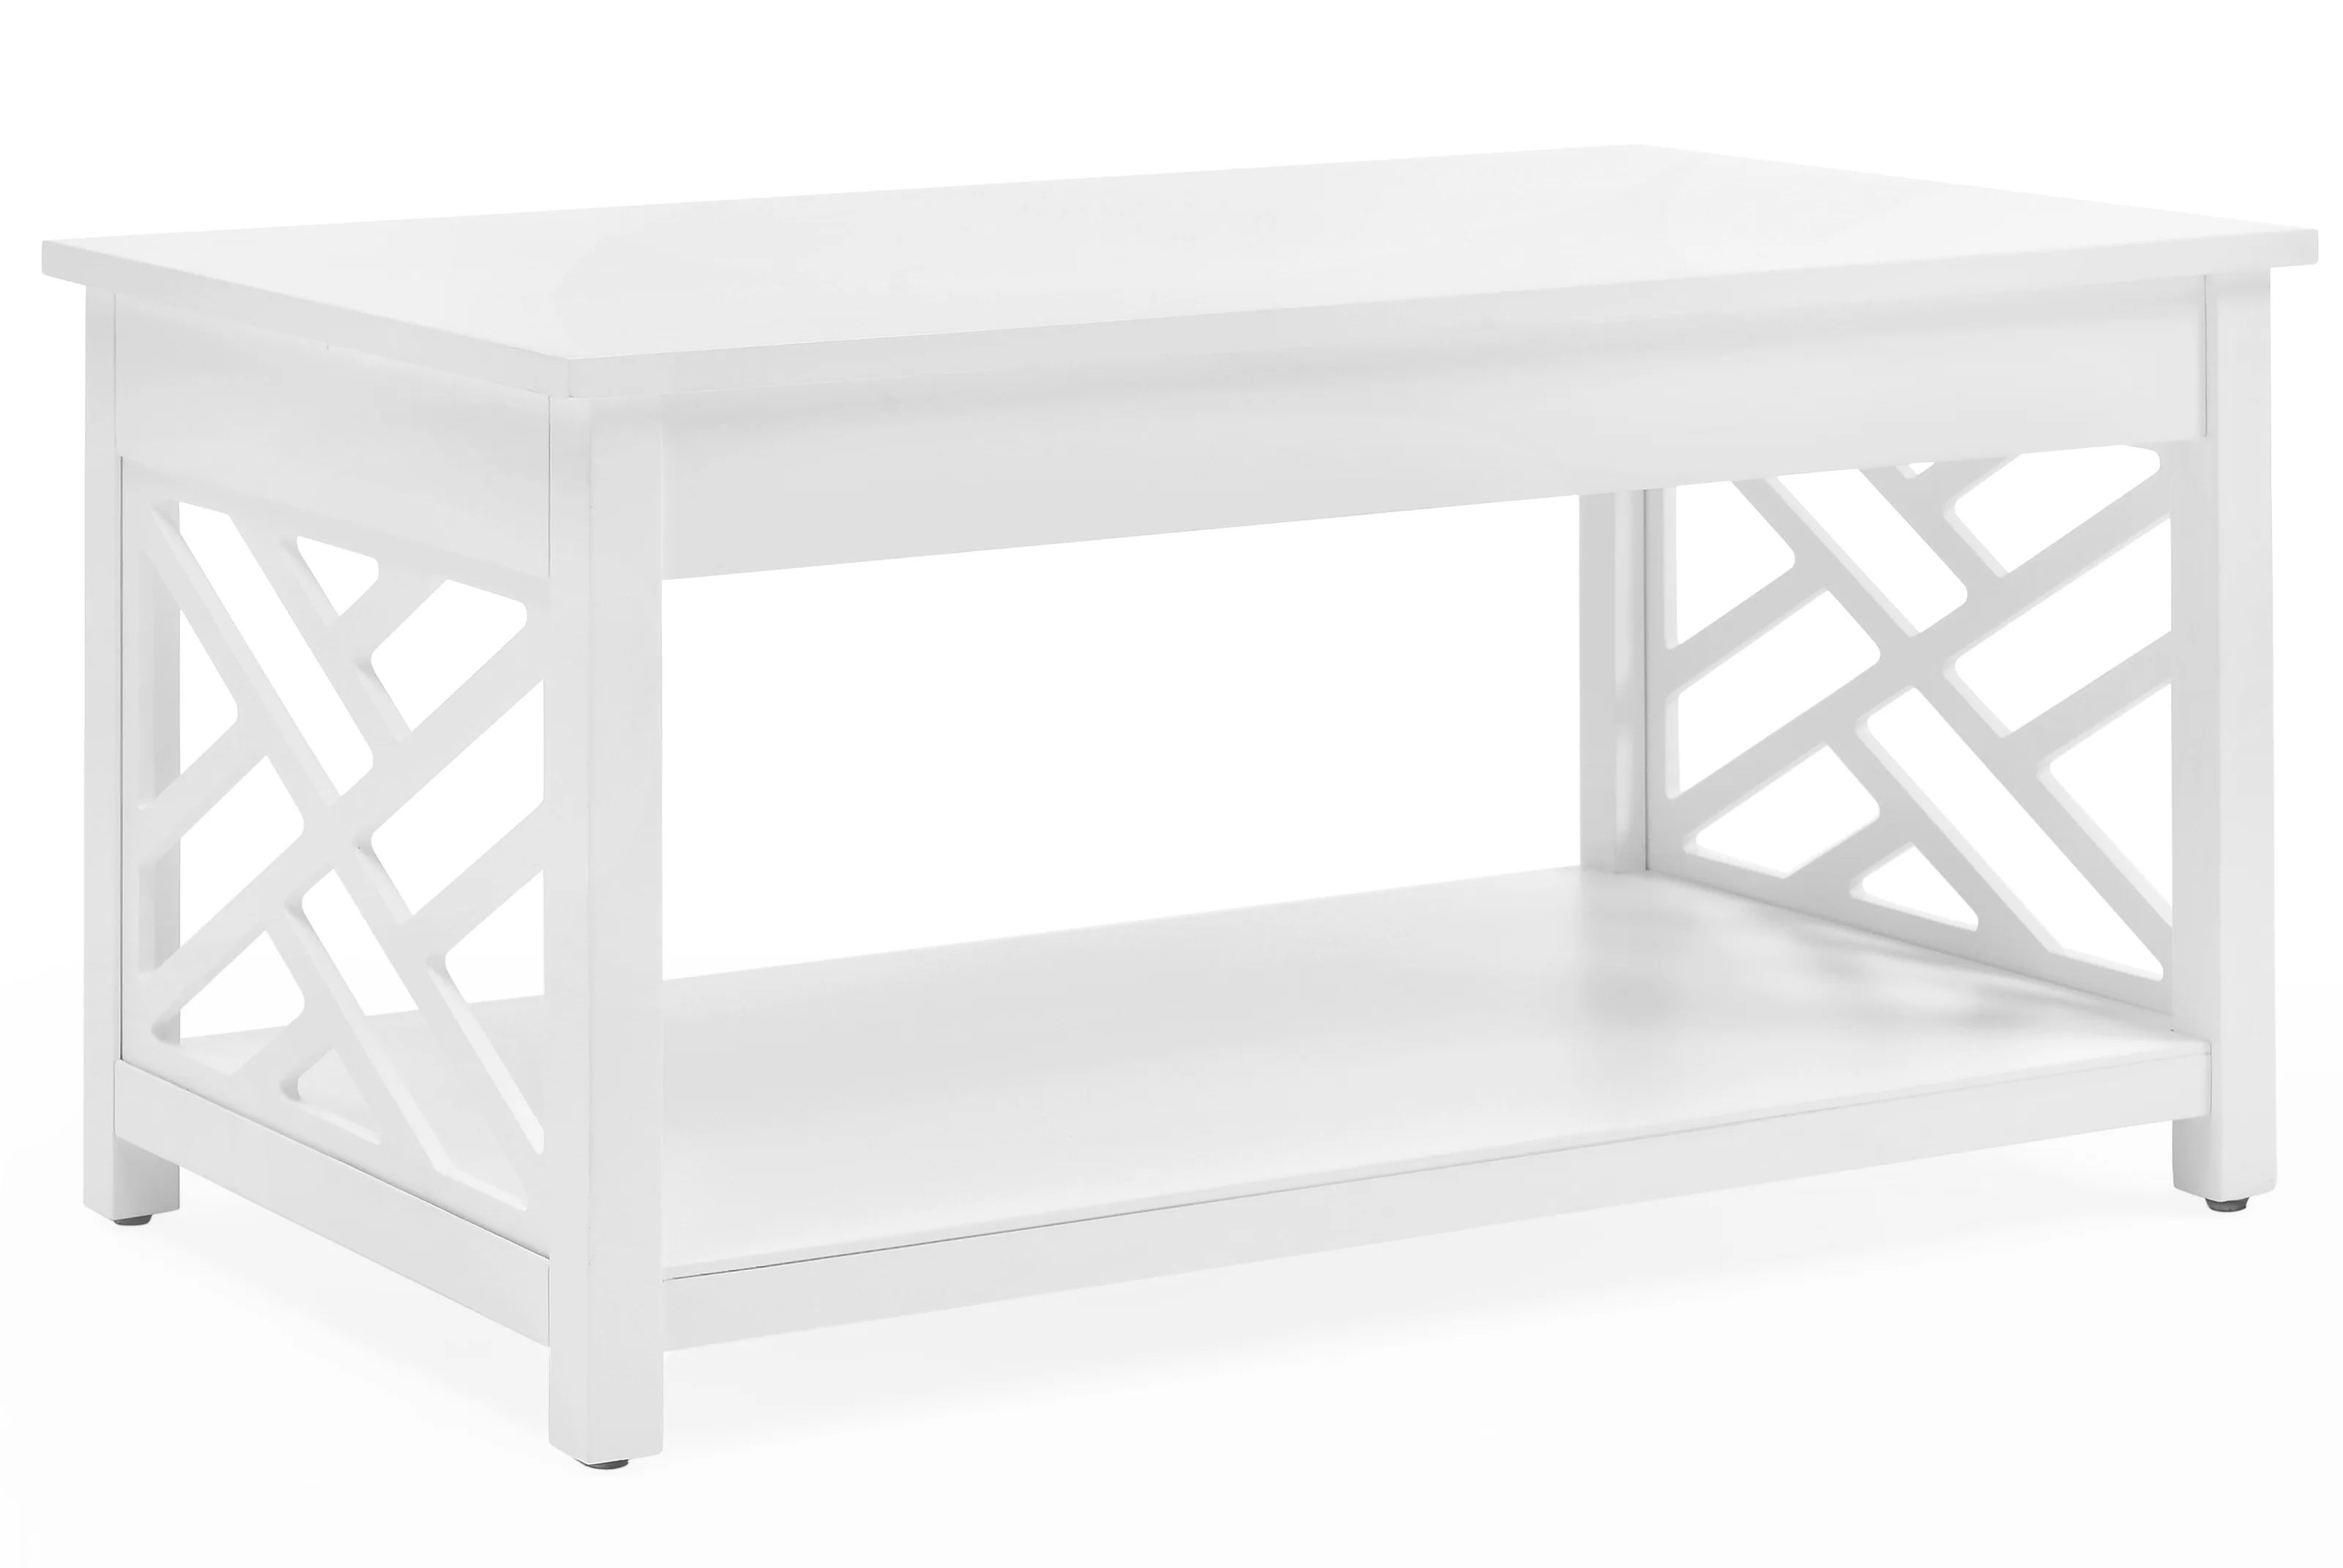 Lund 4 Legs Coffee Table with Storage | Wayfair Professional